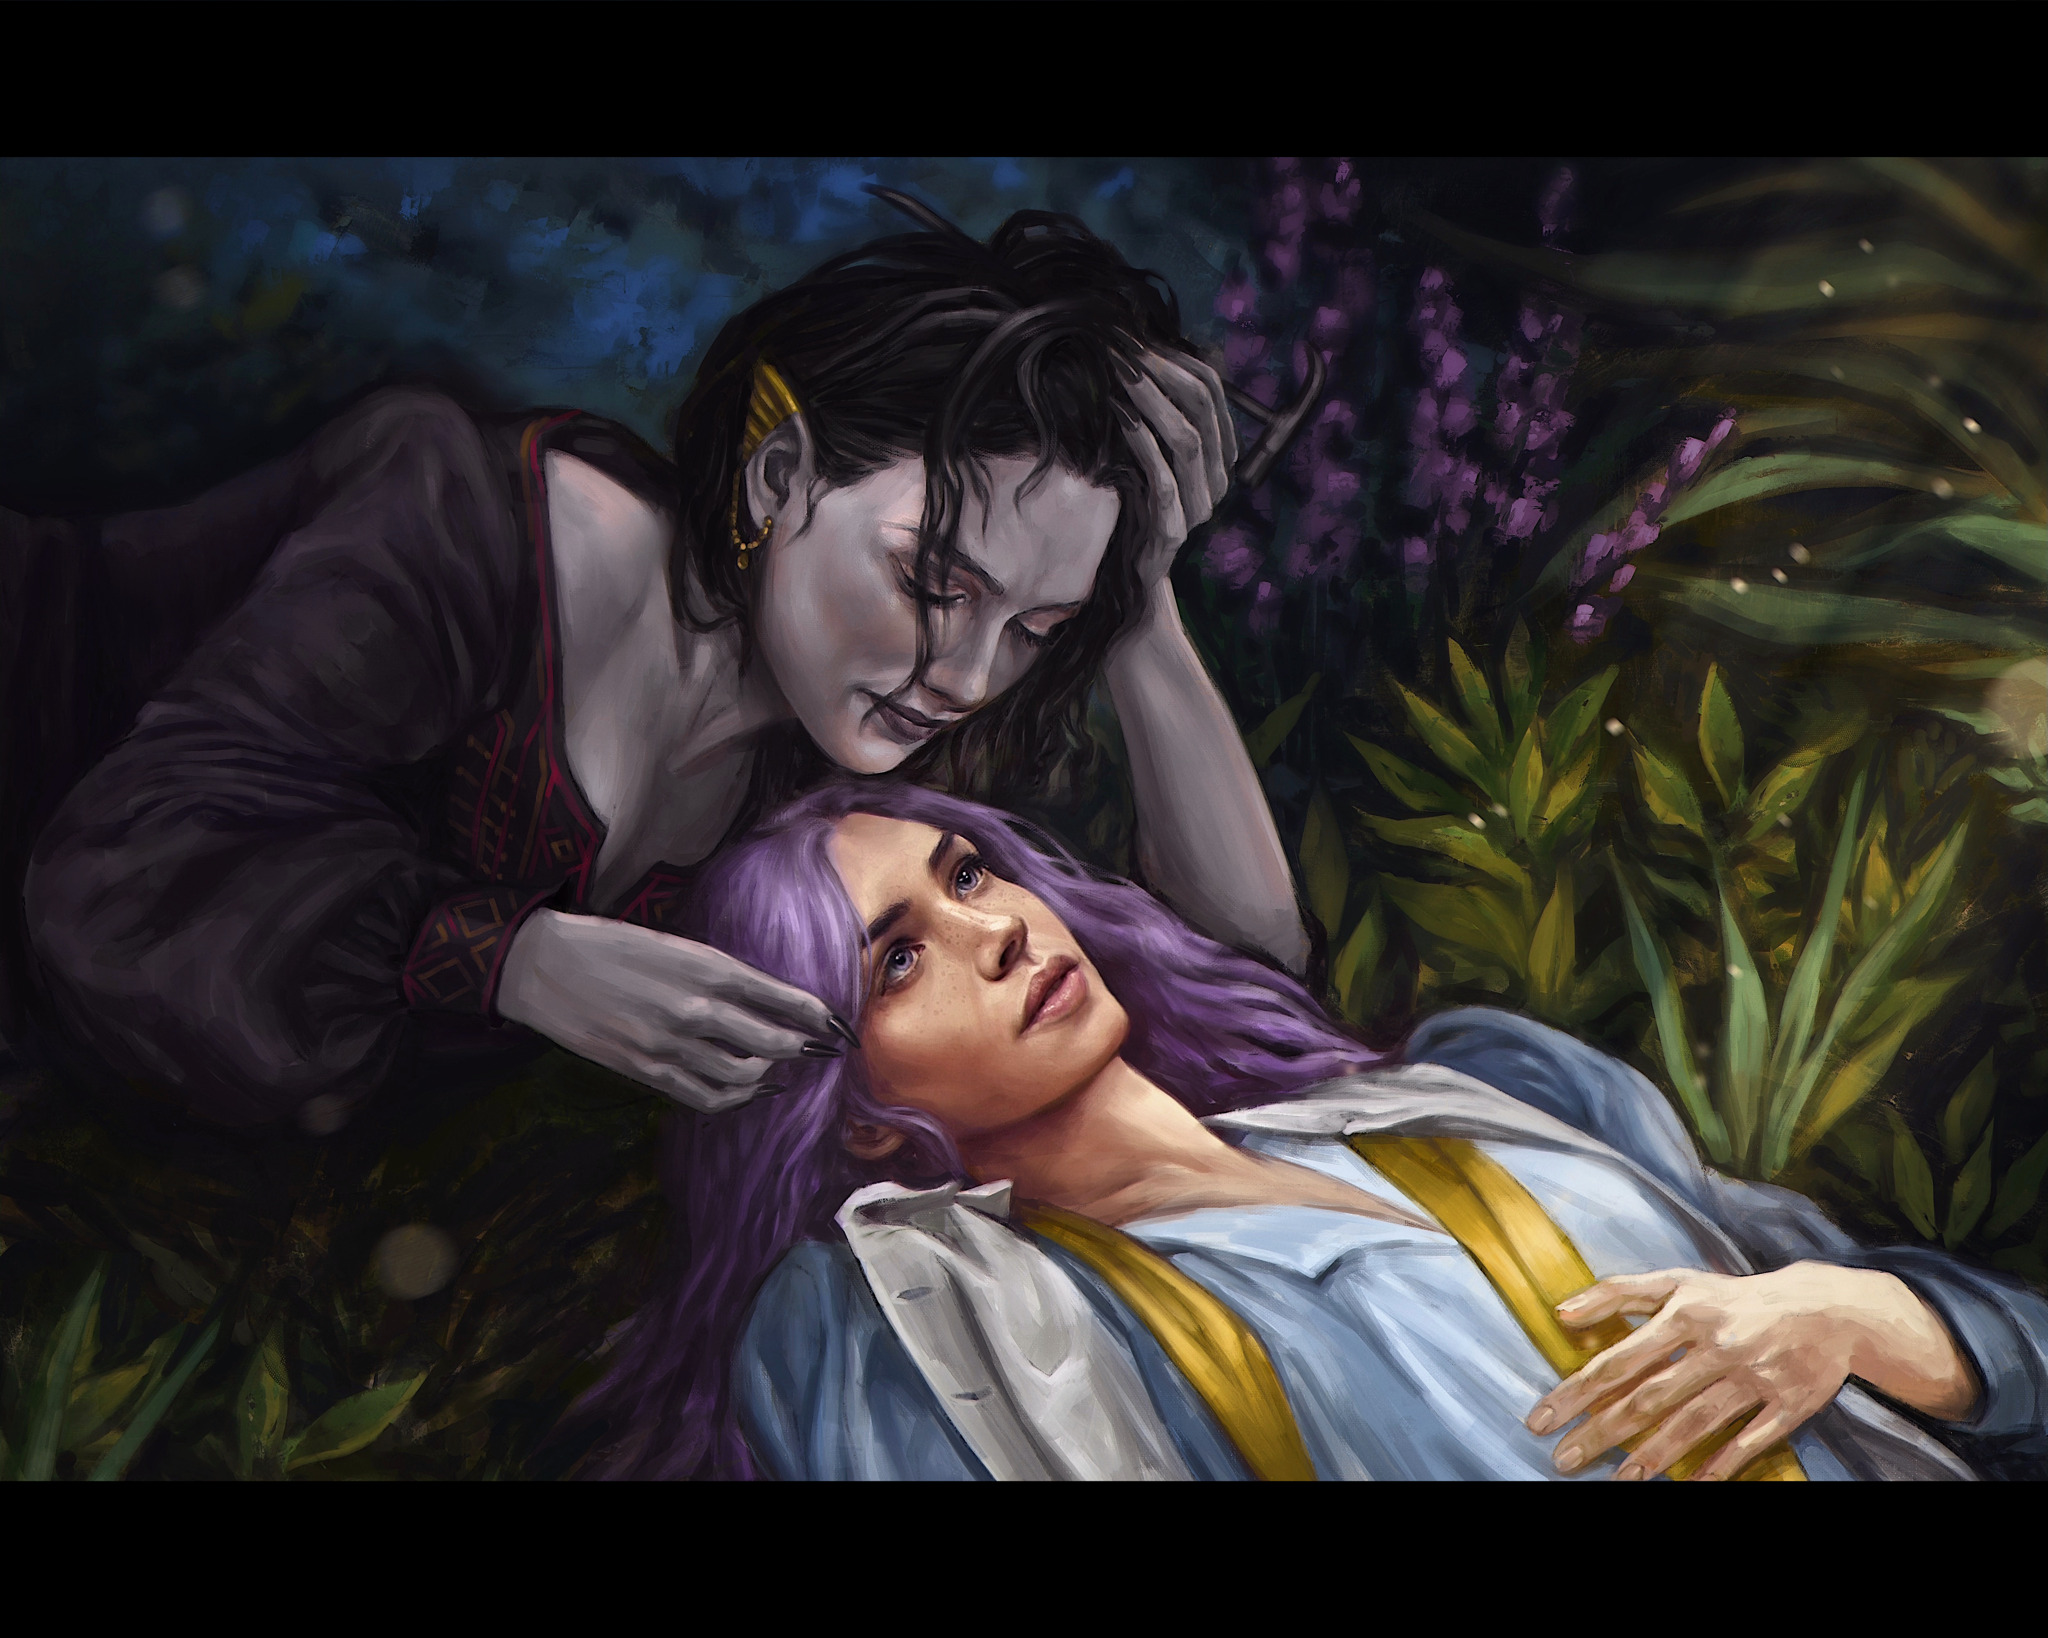 Imogen and Laudna from Critical Role Campaign 3 in a romantic atmosphere